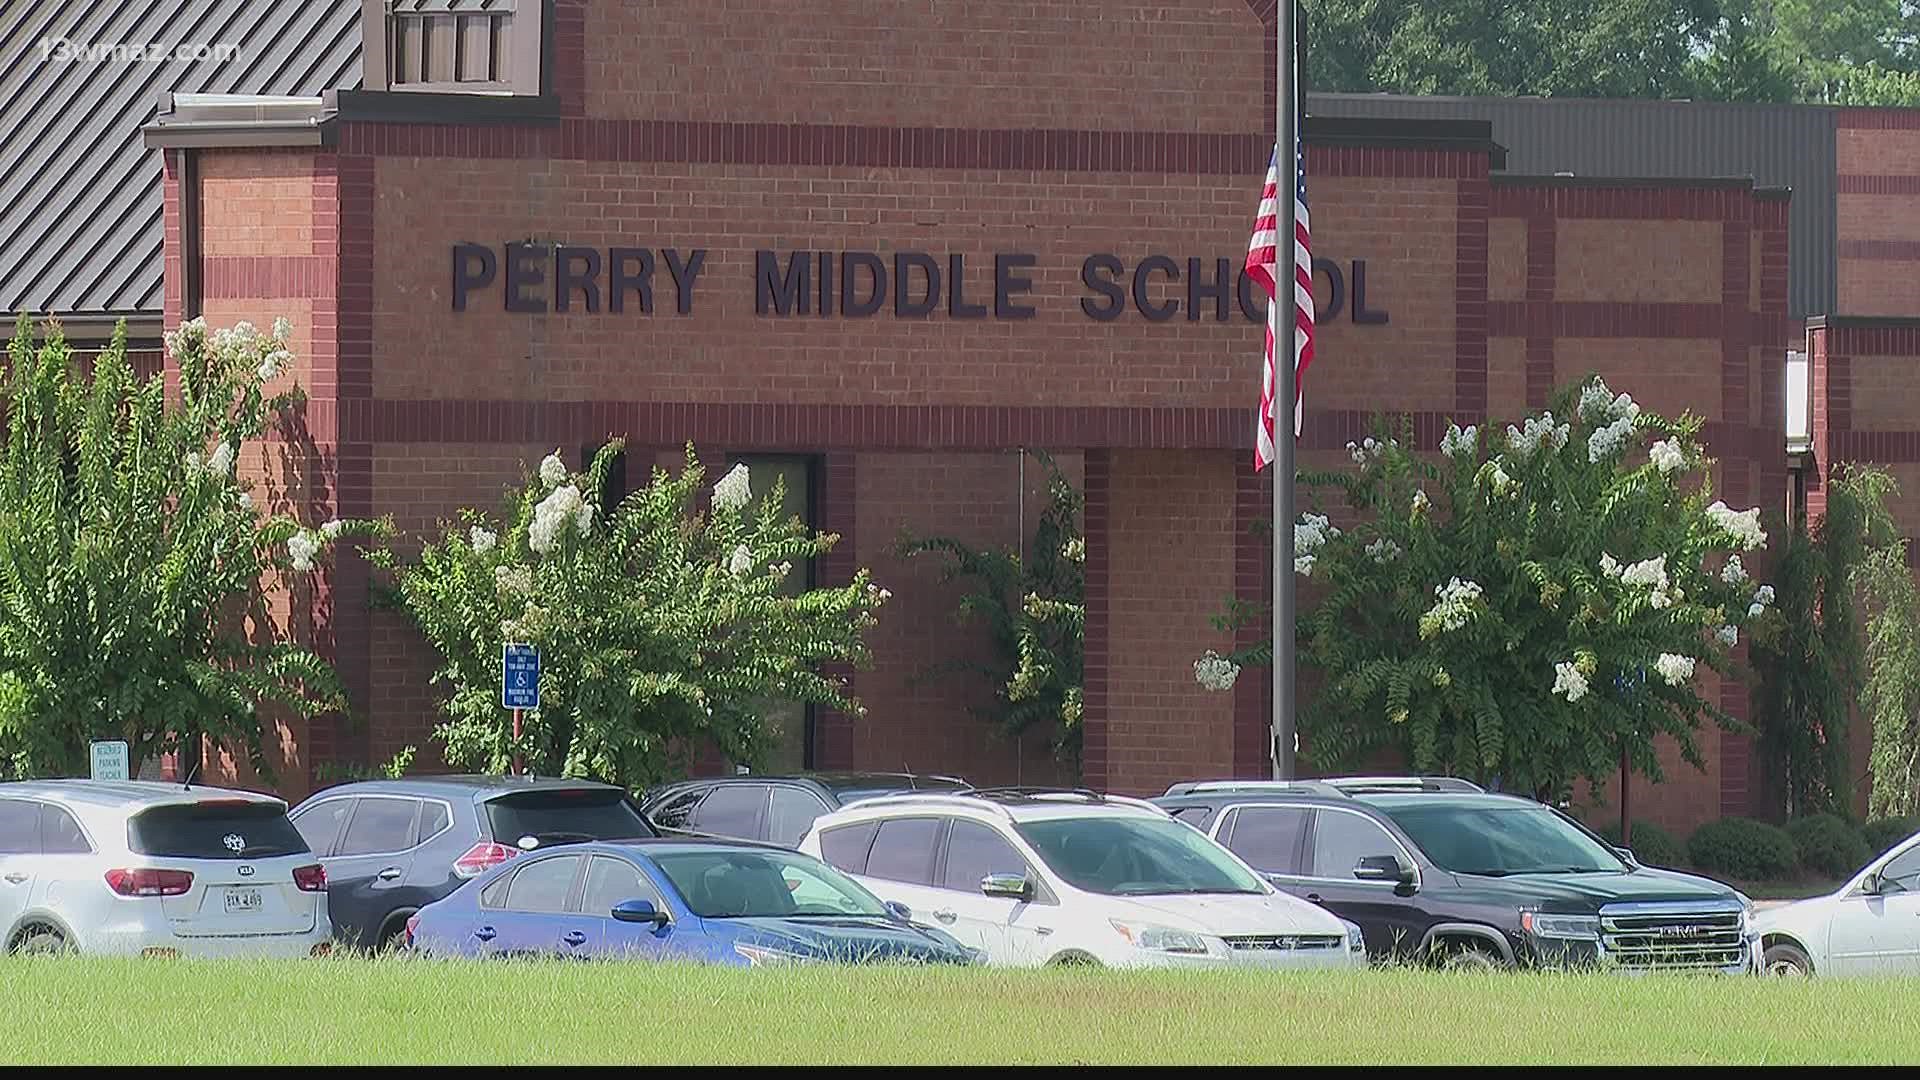 Parents say the district allowed a DJ to play inappropriate music at a middle school dance.